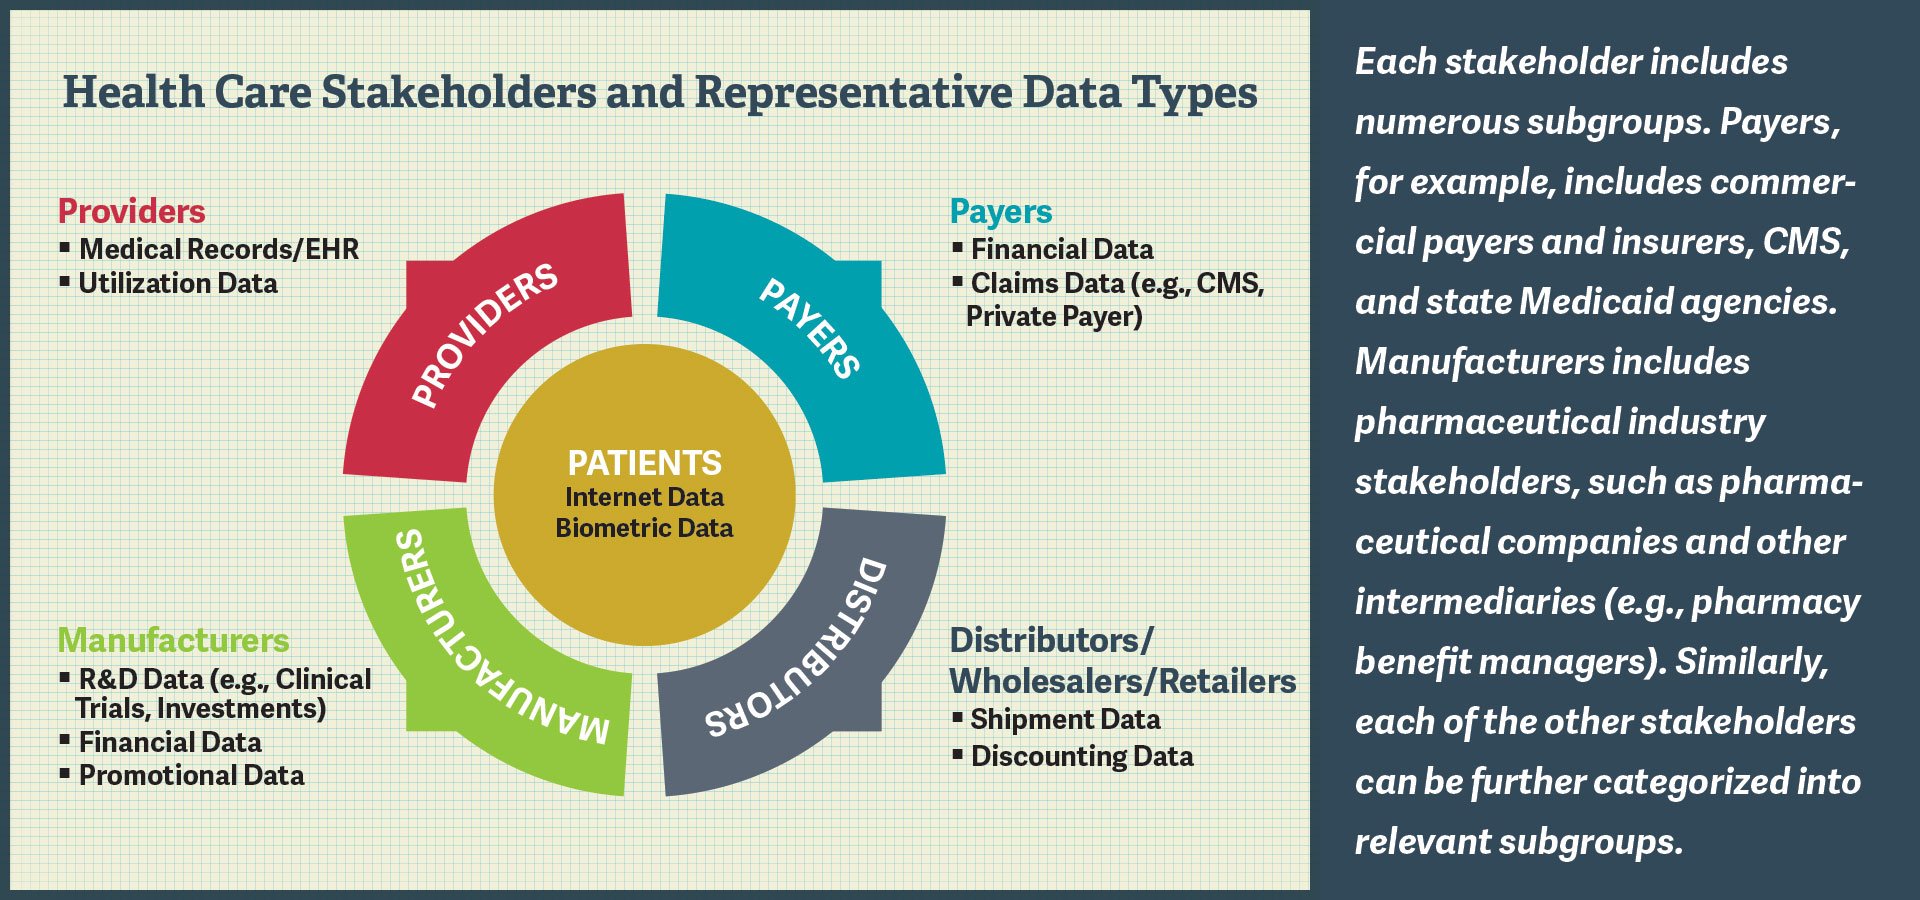 Health Care Stakeholders and Representative Data Types